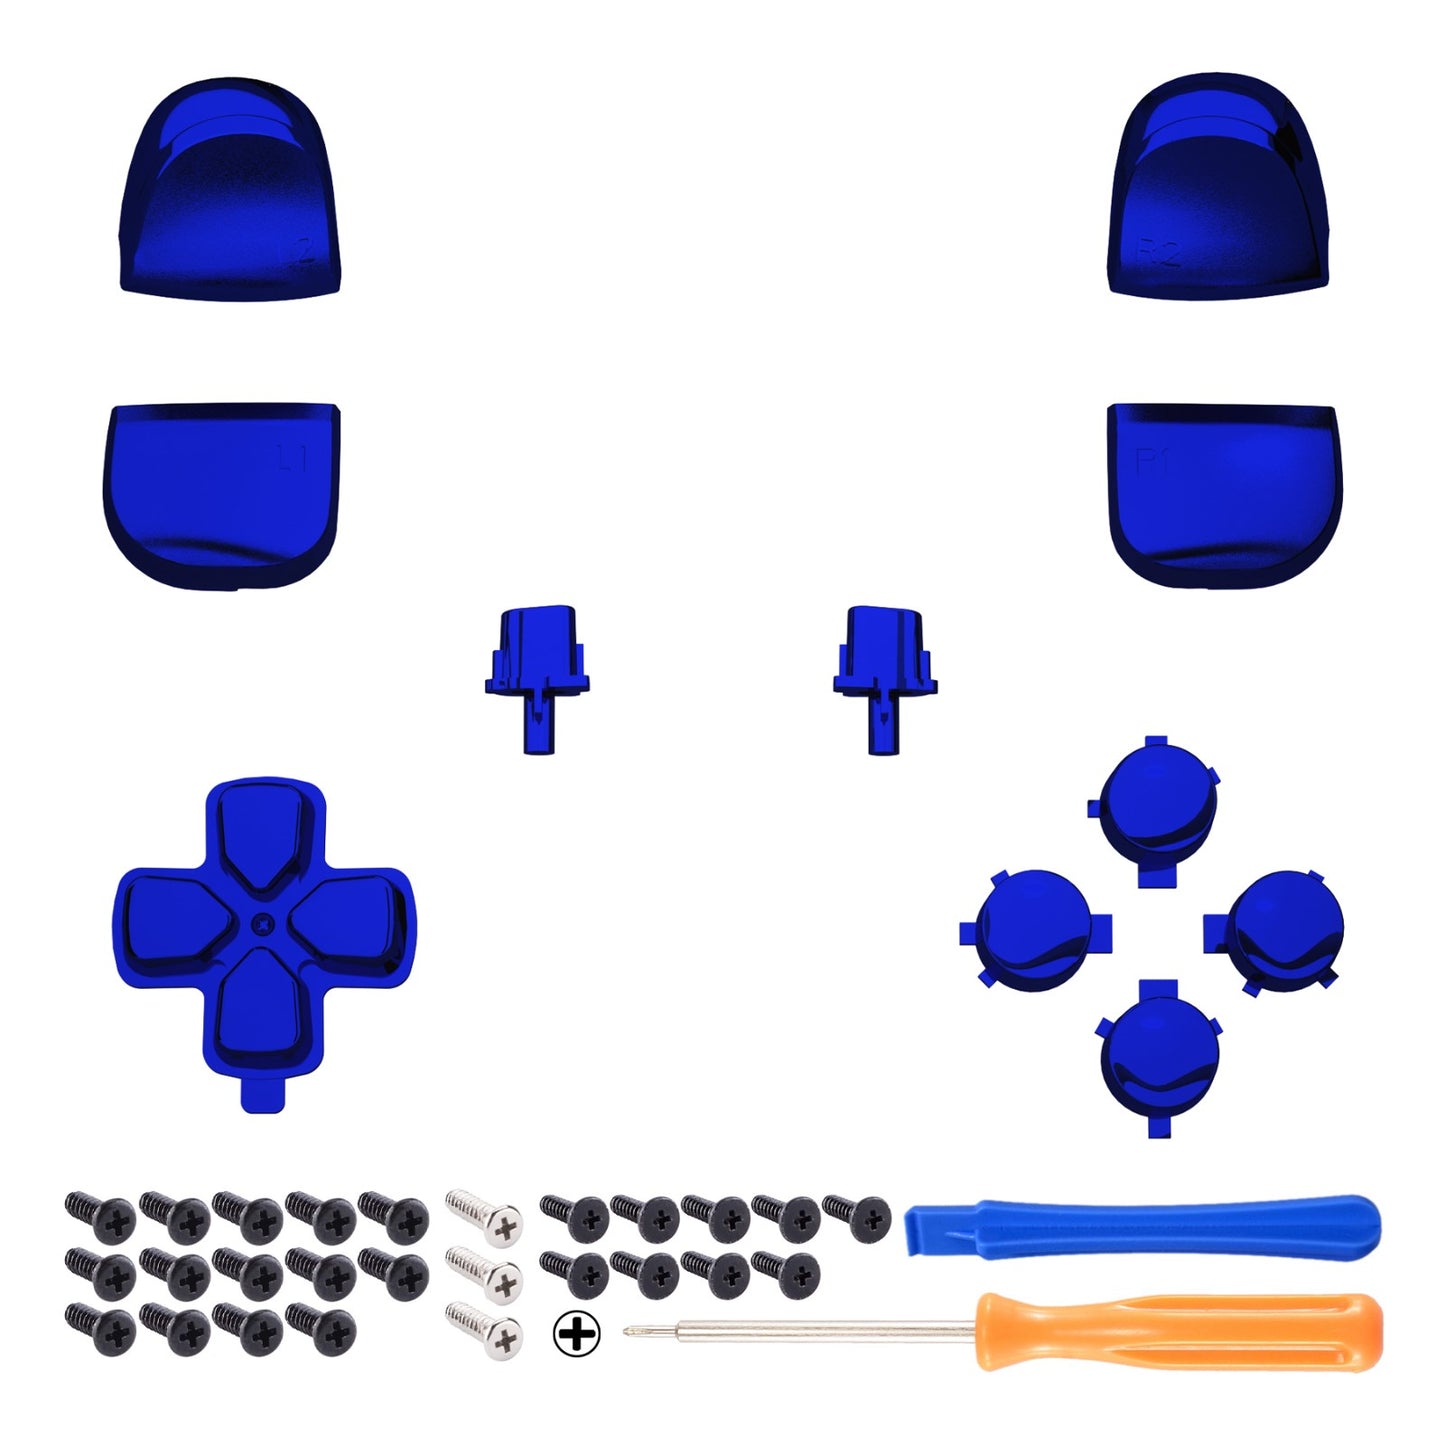 eXtremeRate Retail Replacement D-pad R1 L1 R2 L2 Triggers Share Options Face Buttons, Chrome Blue Full Set Buttons Compatible With ps5 Controller BDM-010 & BDM-020 - JPF2004G2